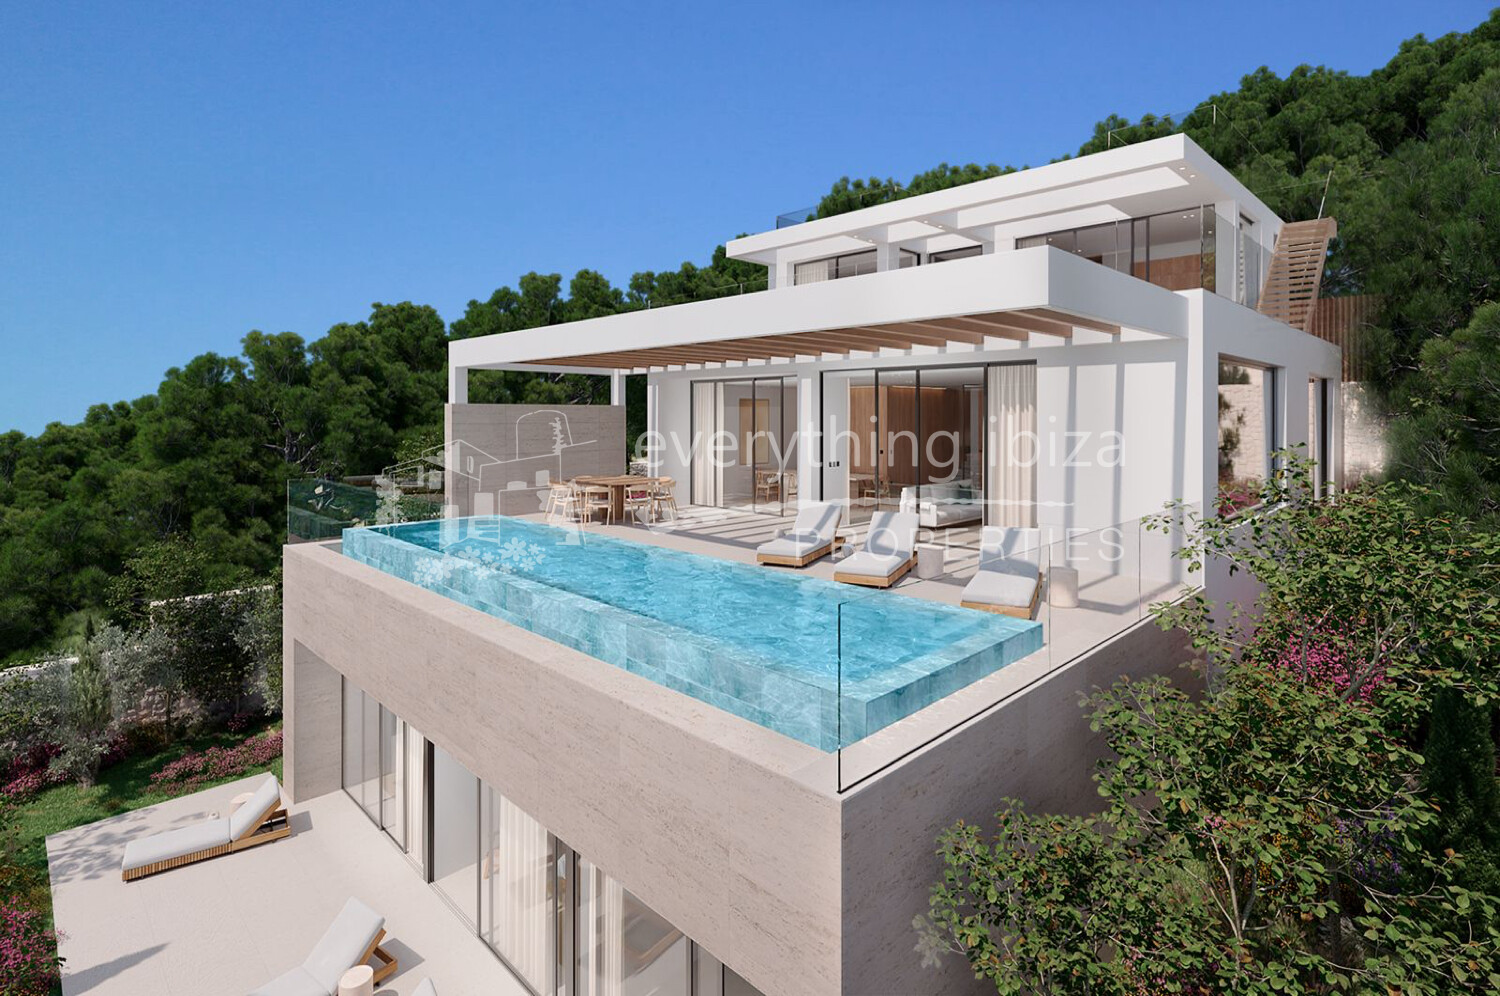 Luxury New Build Mediterranean Styled Villas in a Desirable Excellent Location, ref. 1697, for sale in Ibiza by everything ibiza Properties